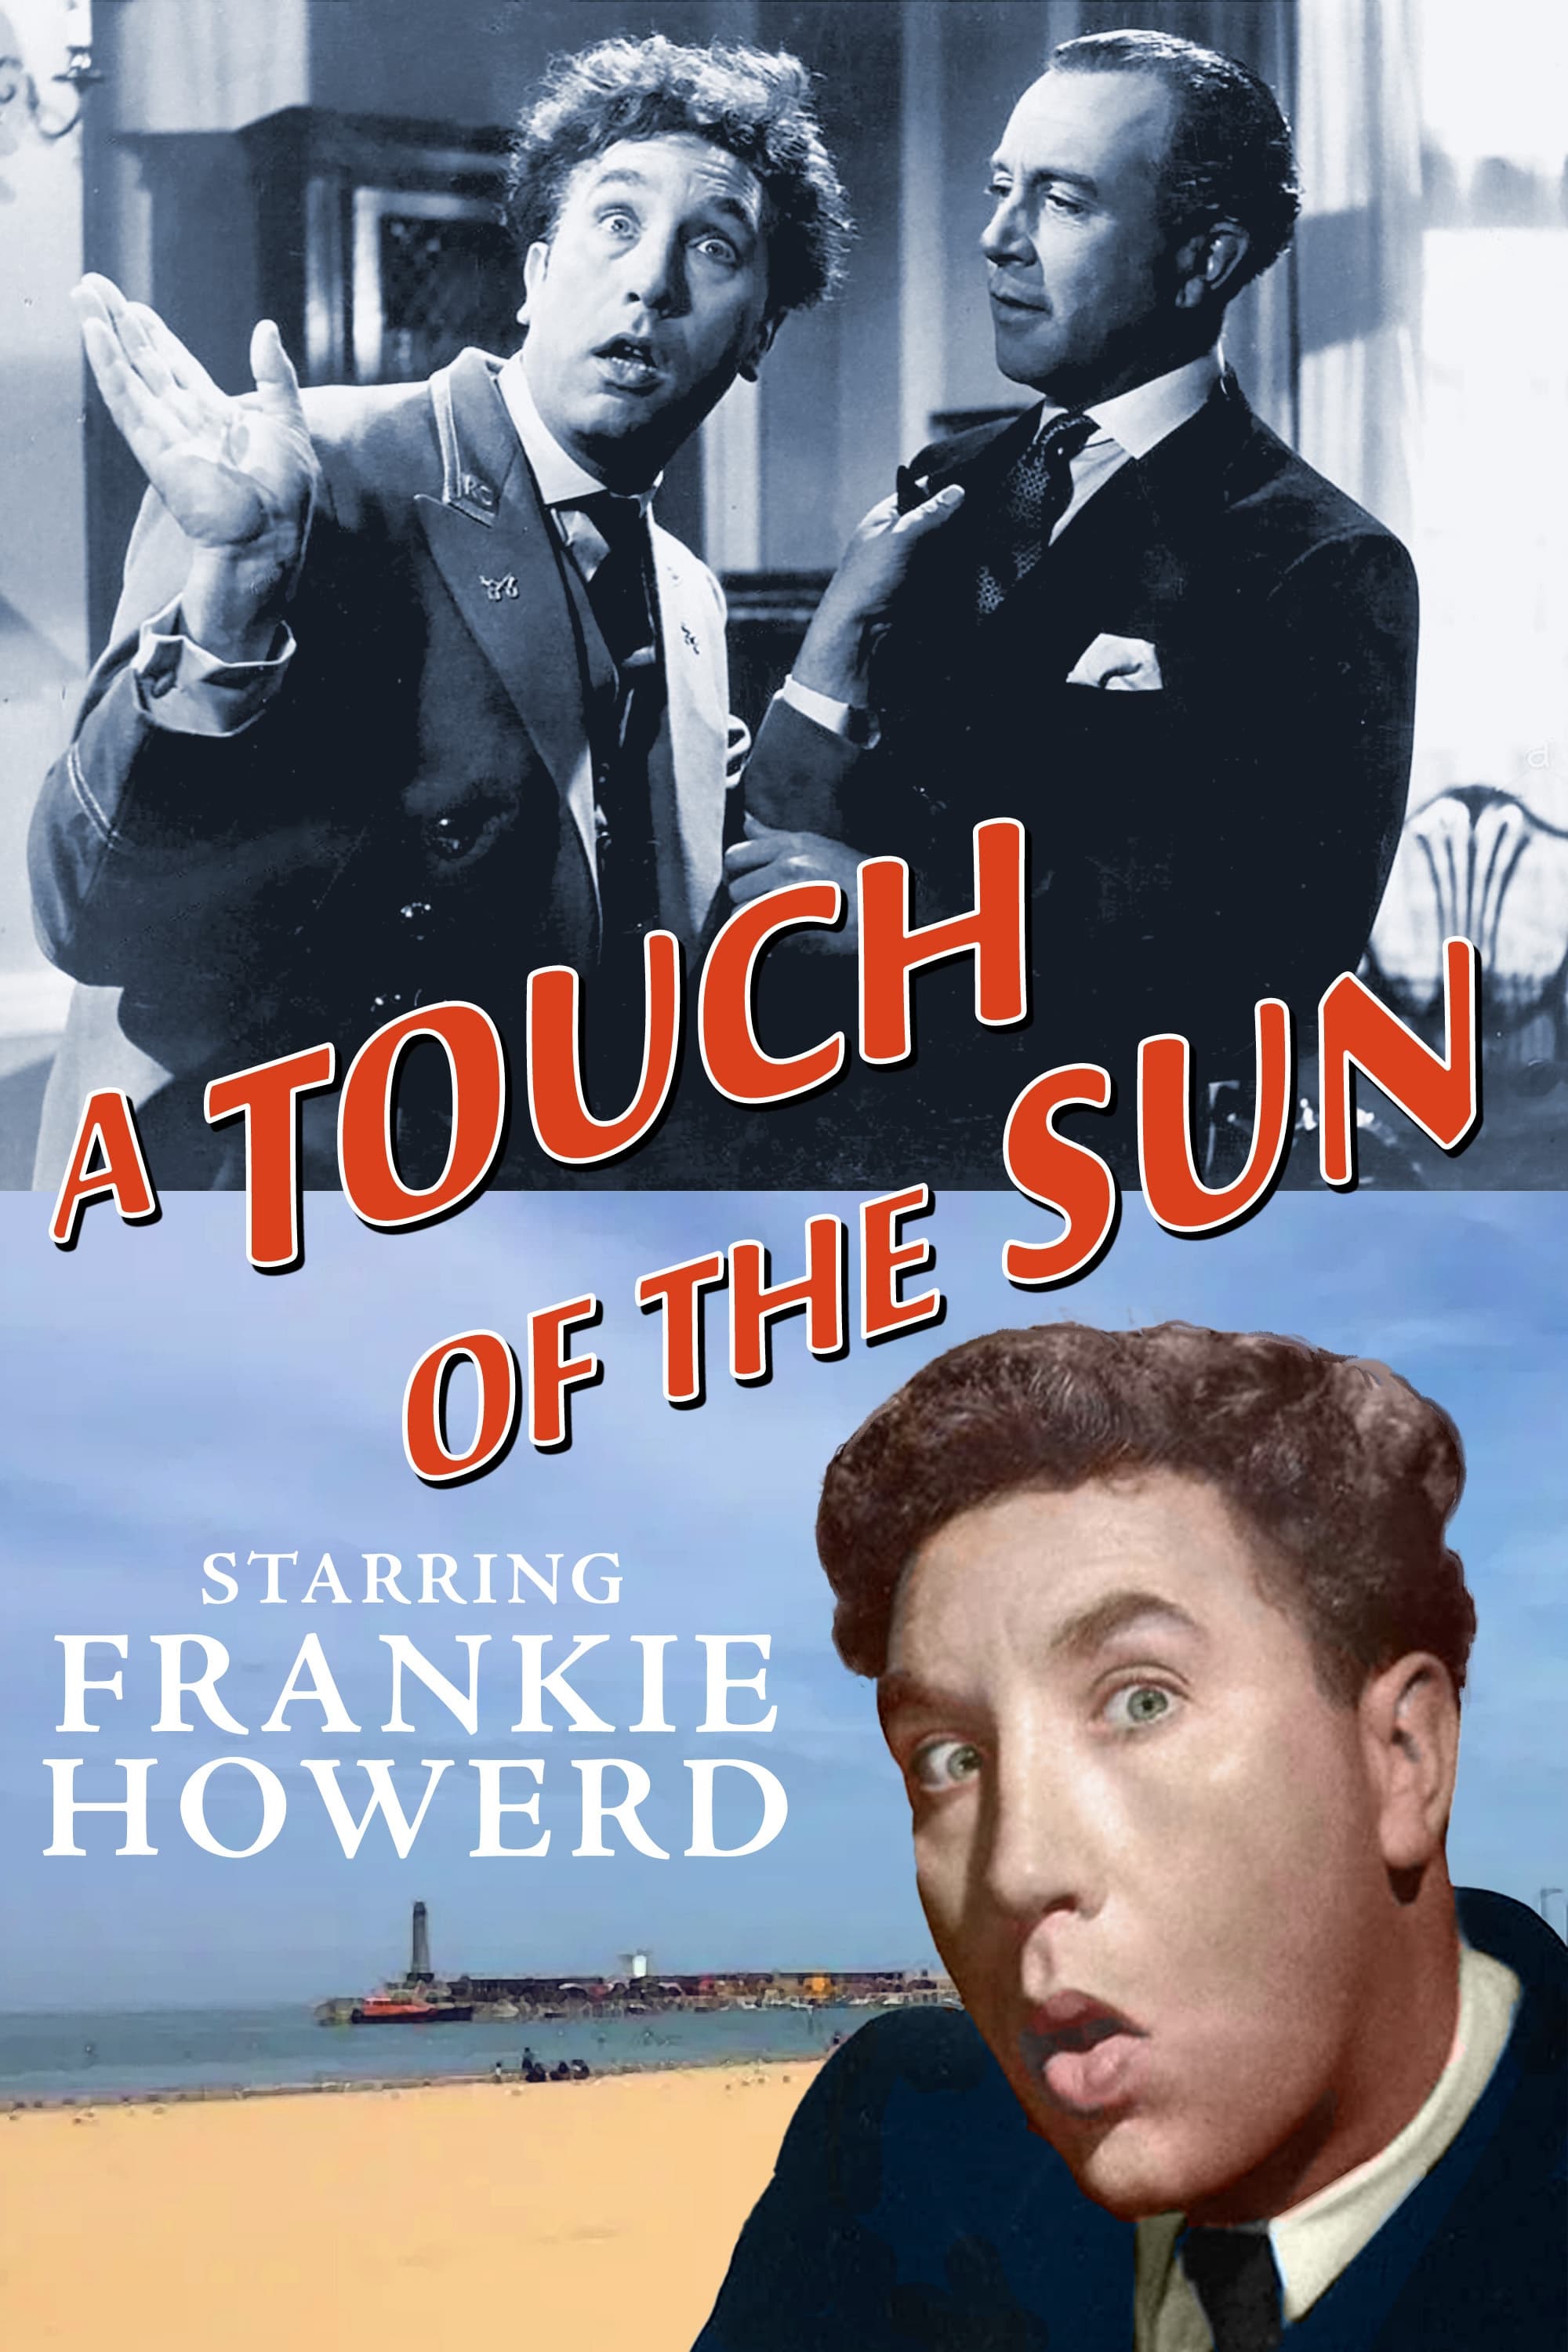 A Touch of the Sun (1956)